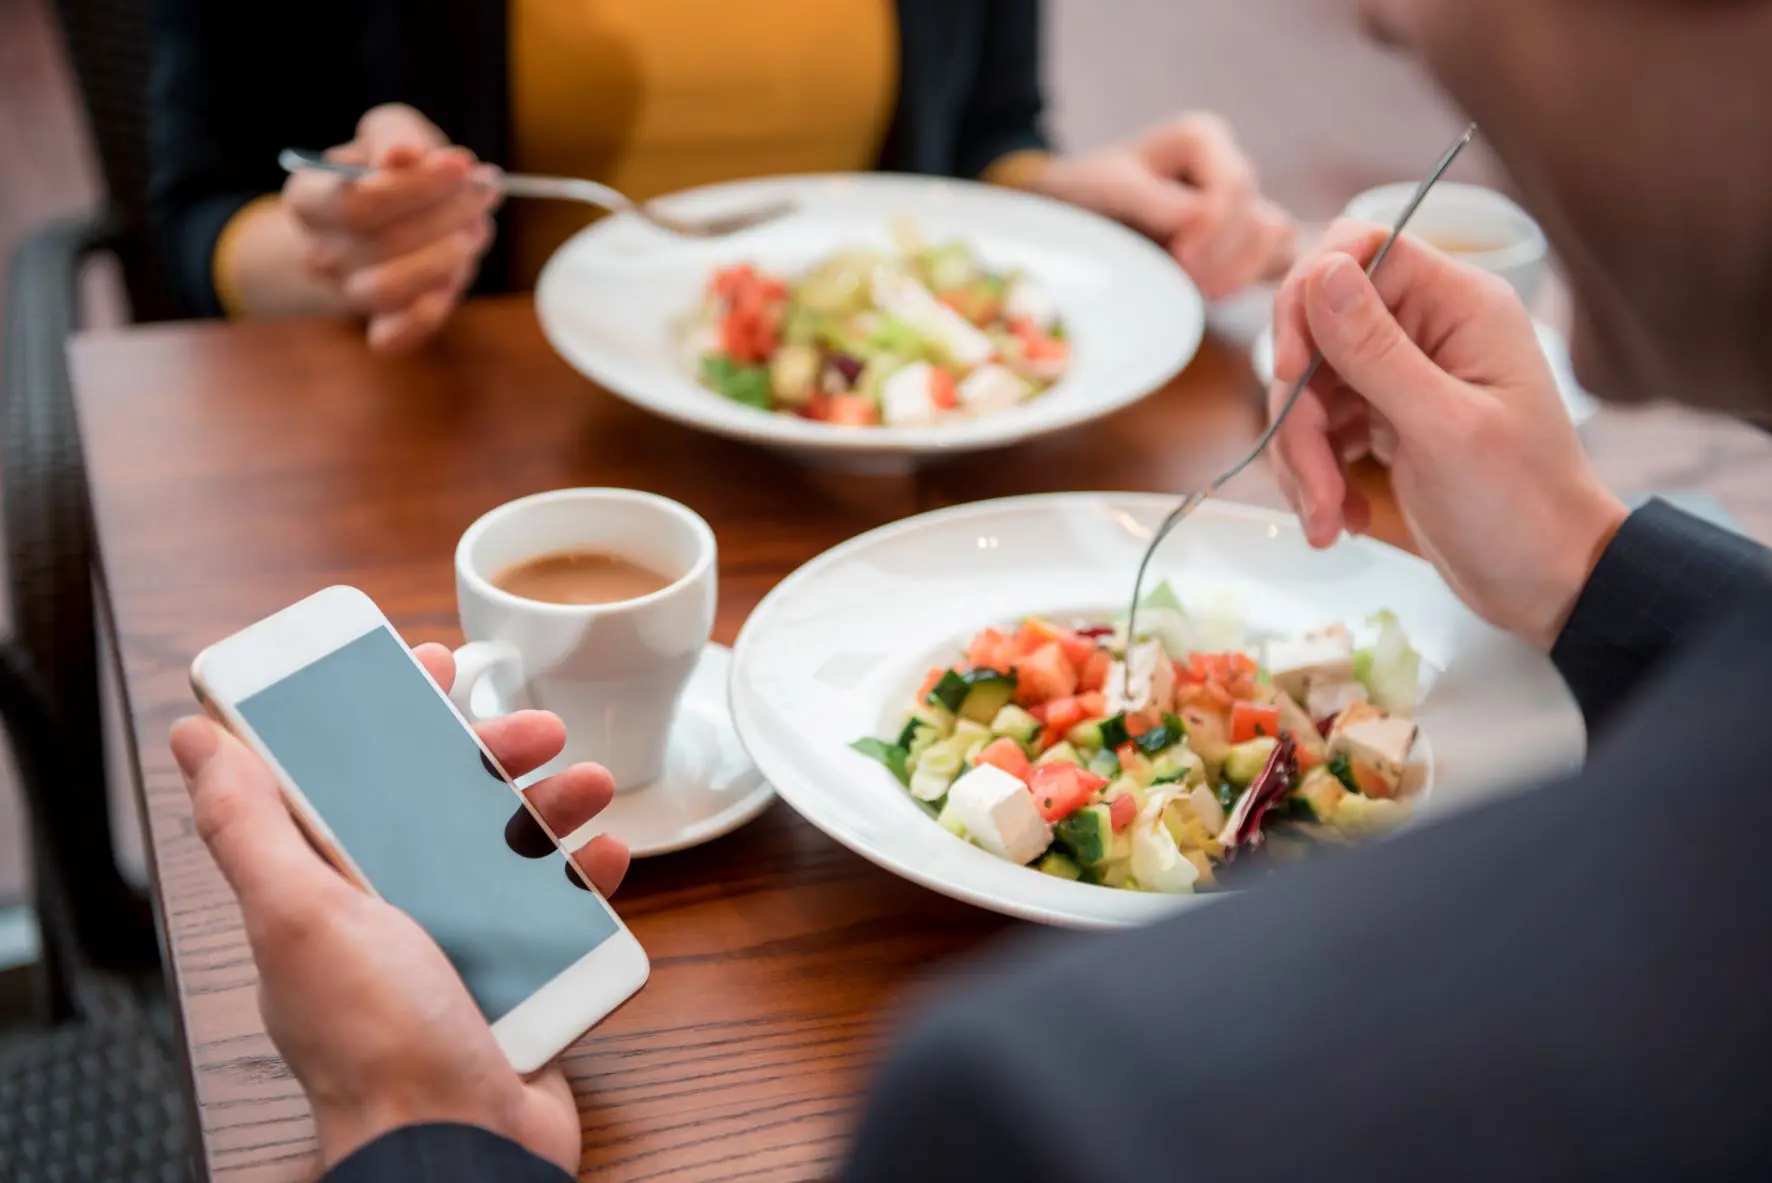 Two individuals are seated at a wooden table, enjoying fresh salads and cups of coffee. One person is holding a fork in one hand and a smartphone in the other, perhaps checking food expenses, while the other is just about to take a bite. The scene suggests a casual, modern dining experience. | MONEY6X